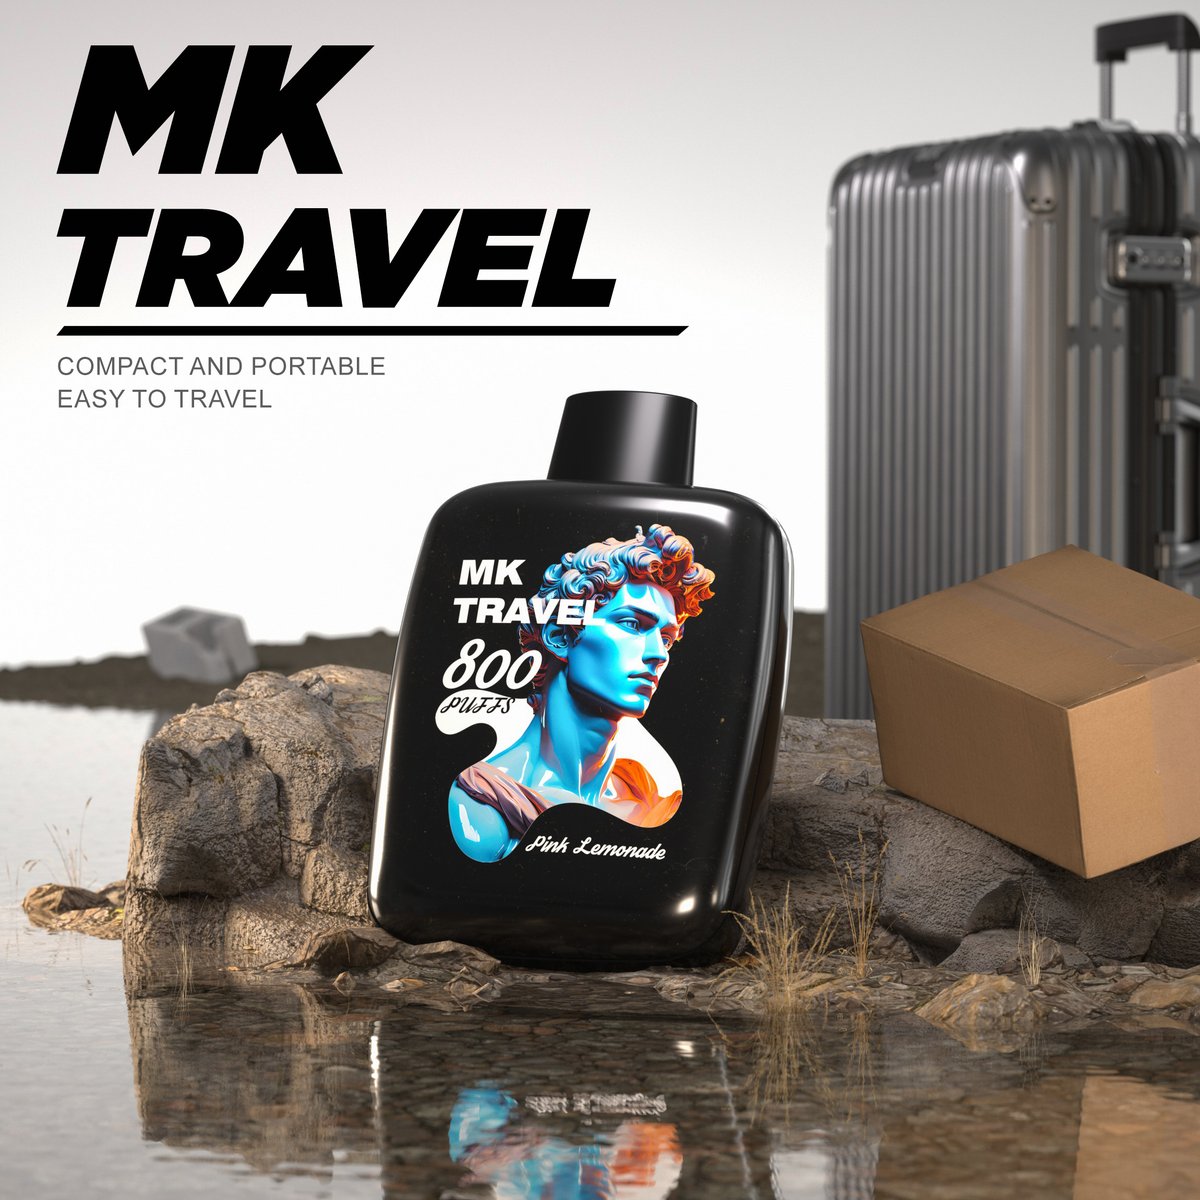 Say goodbye to bulky devices! The compact and portable MK Travel 600Puffs fit perfectly in your pocket or purse. #CompactVape #PortableVaping - ONLY 21+🚭 #mckesse #vaping #vapelife #disposablevape #vape #vapers #vapenation #vapeuk #vapor #vapelyfe #vapeshop